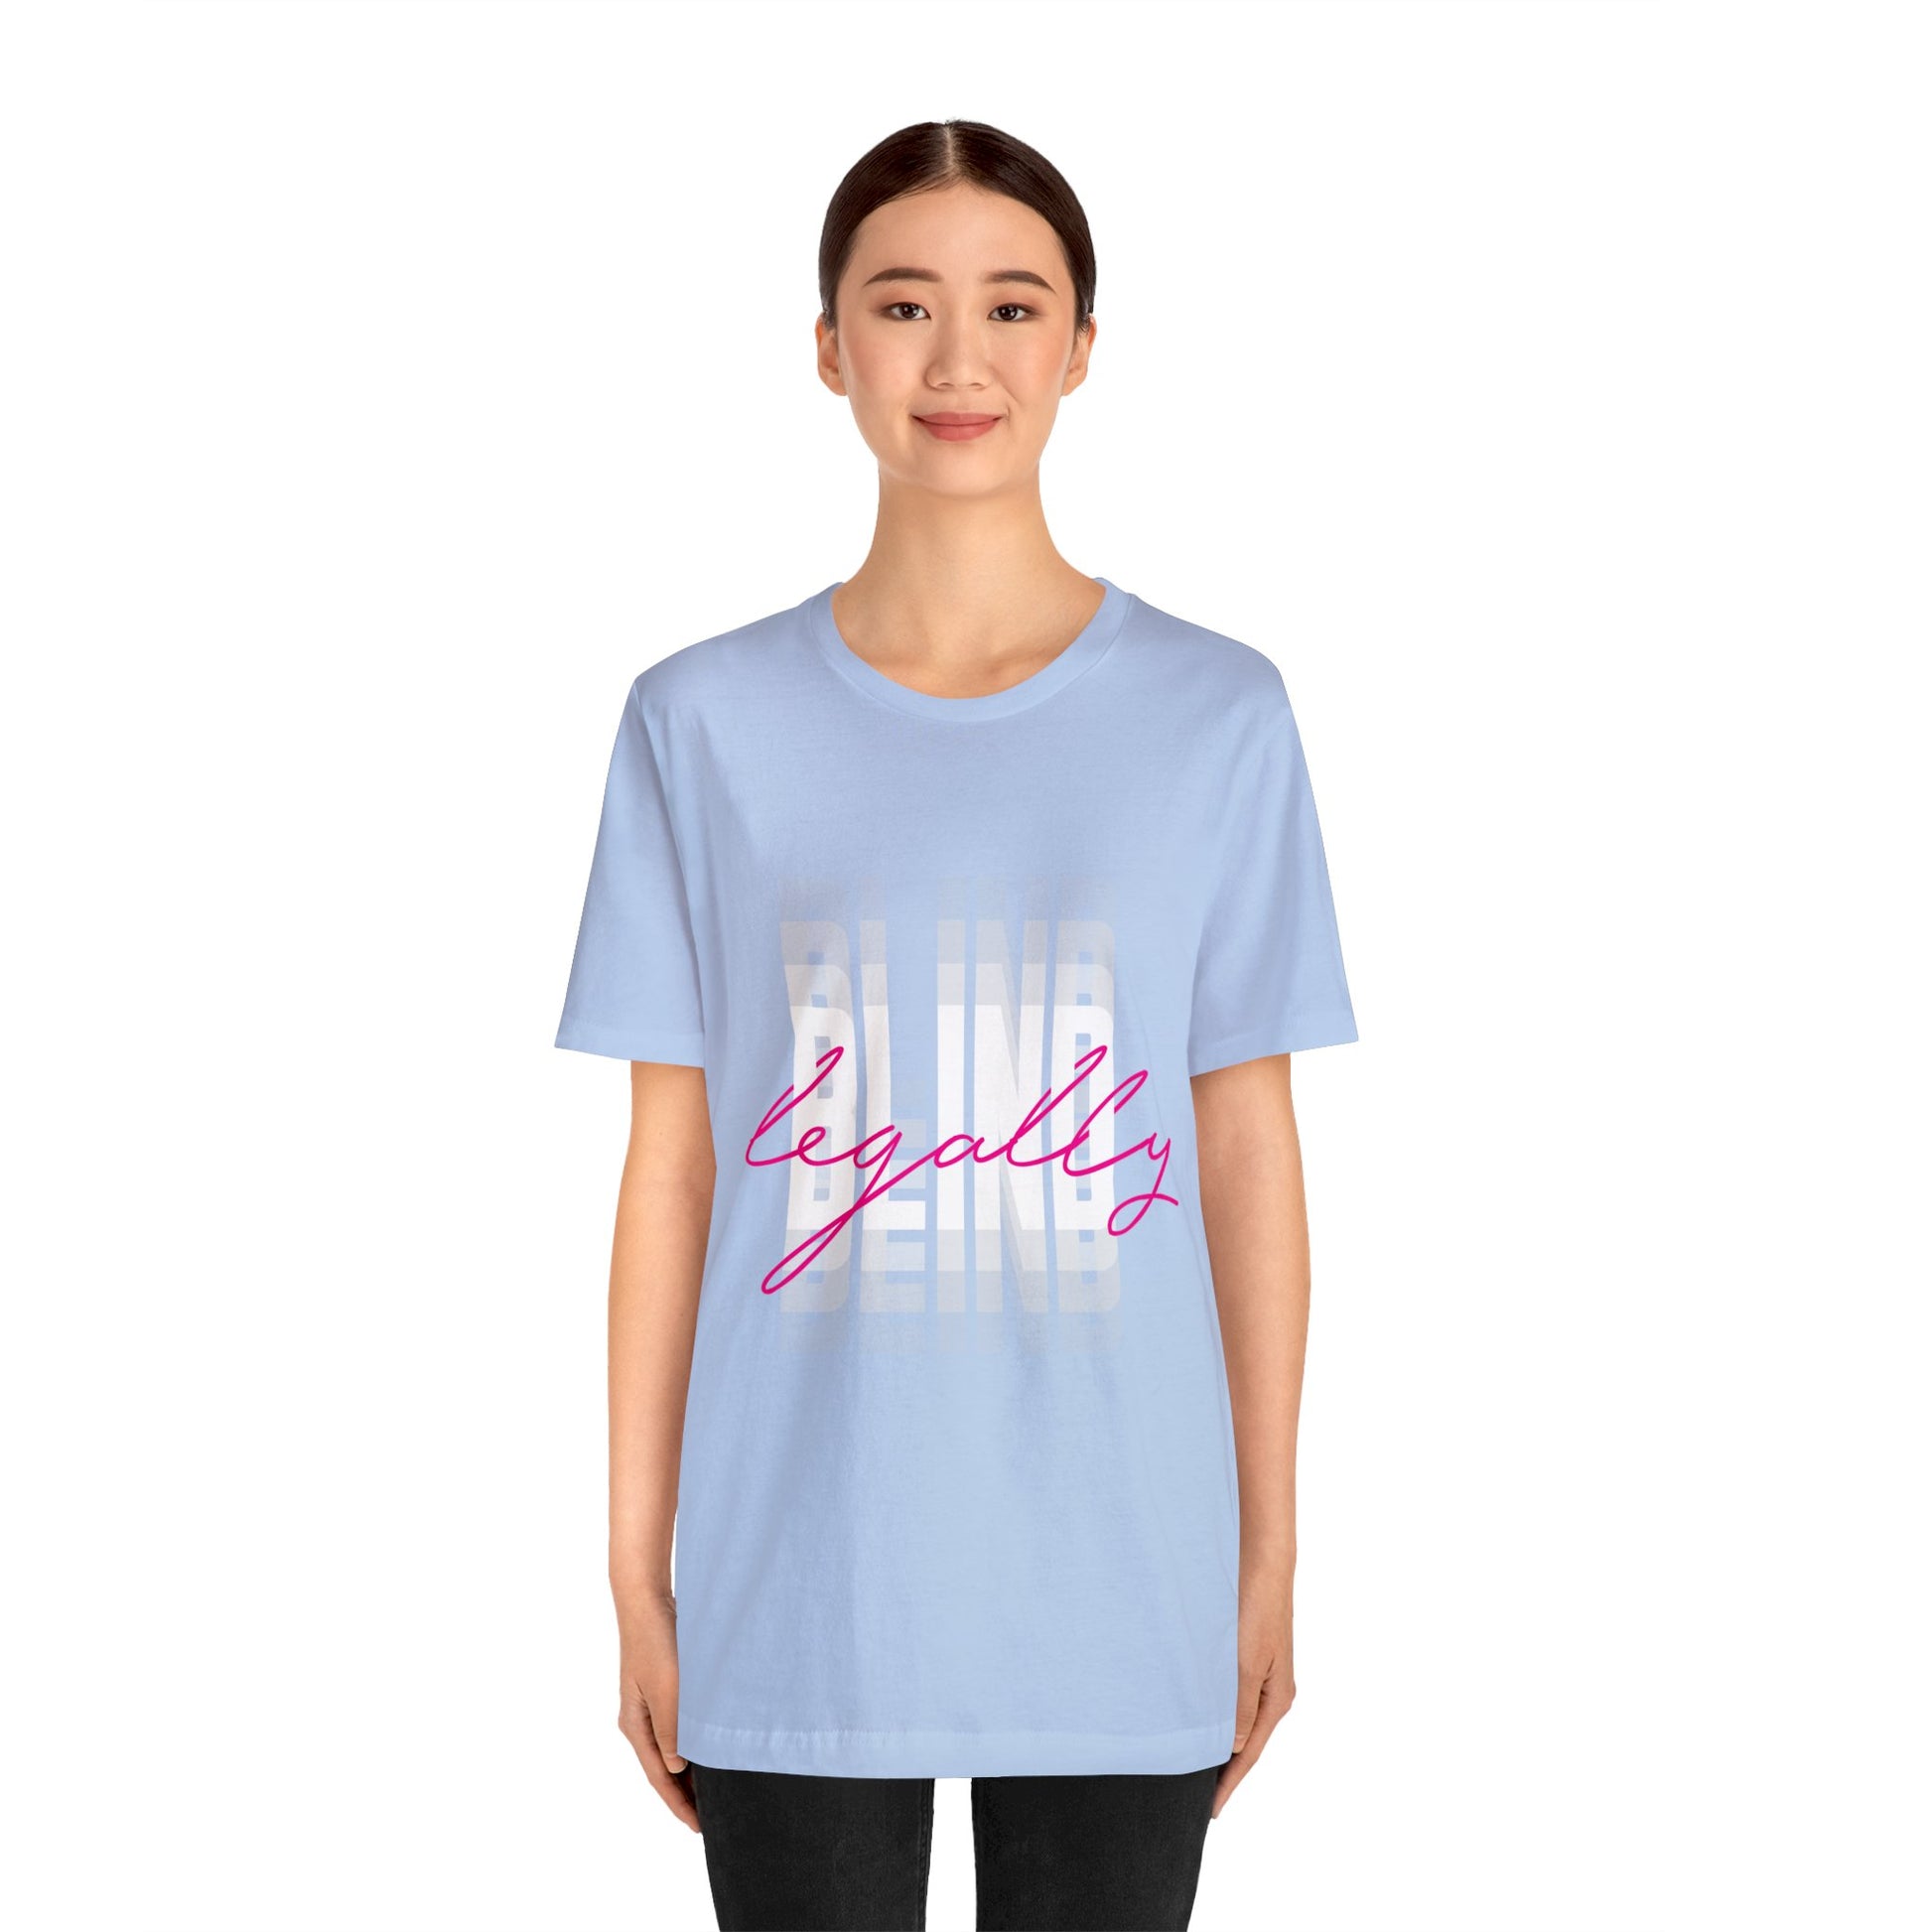 Legally Blind (Blurry) w/ pink- Unisex Jersey Short Sleeve Tee